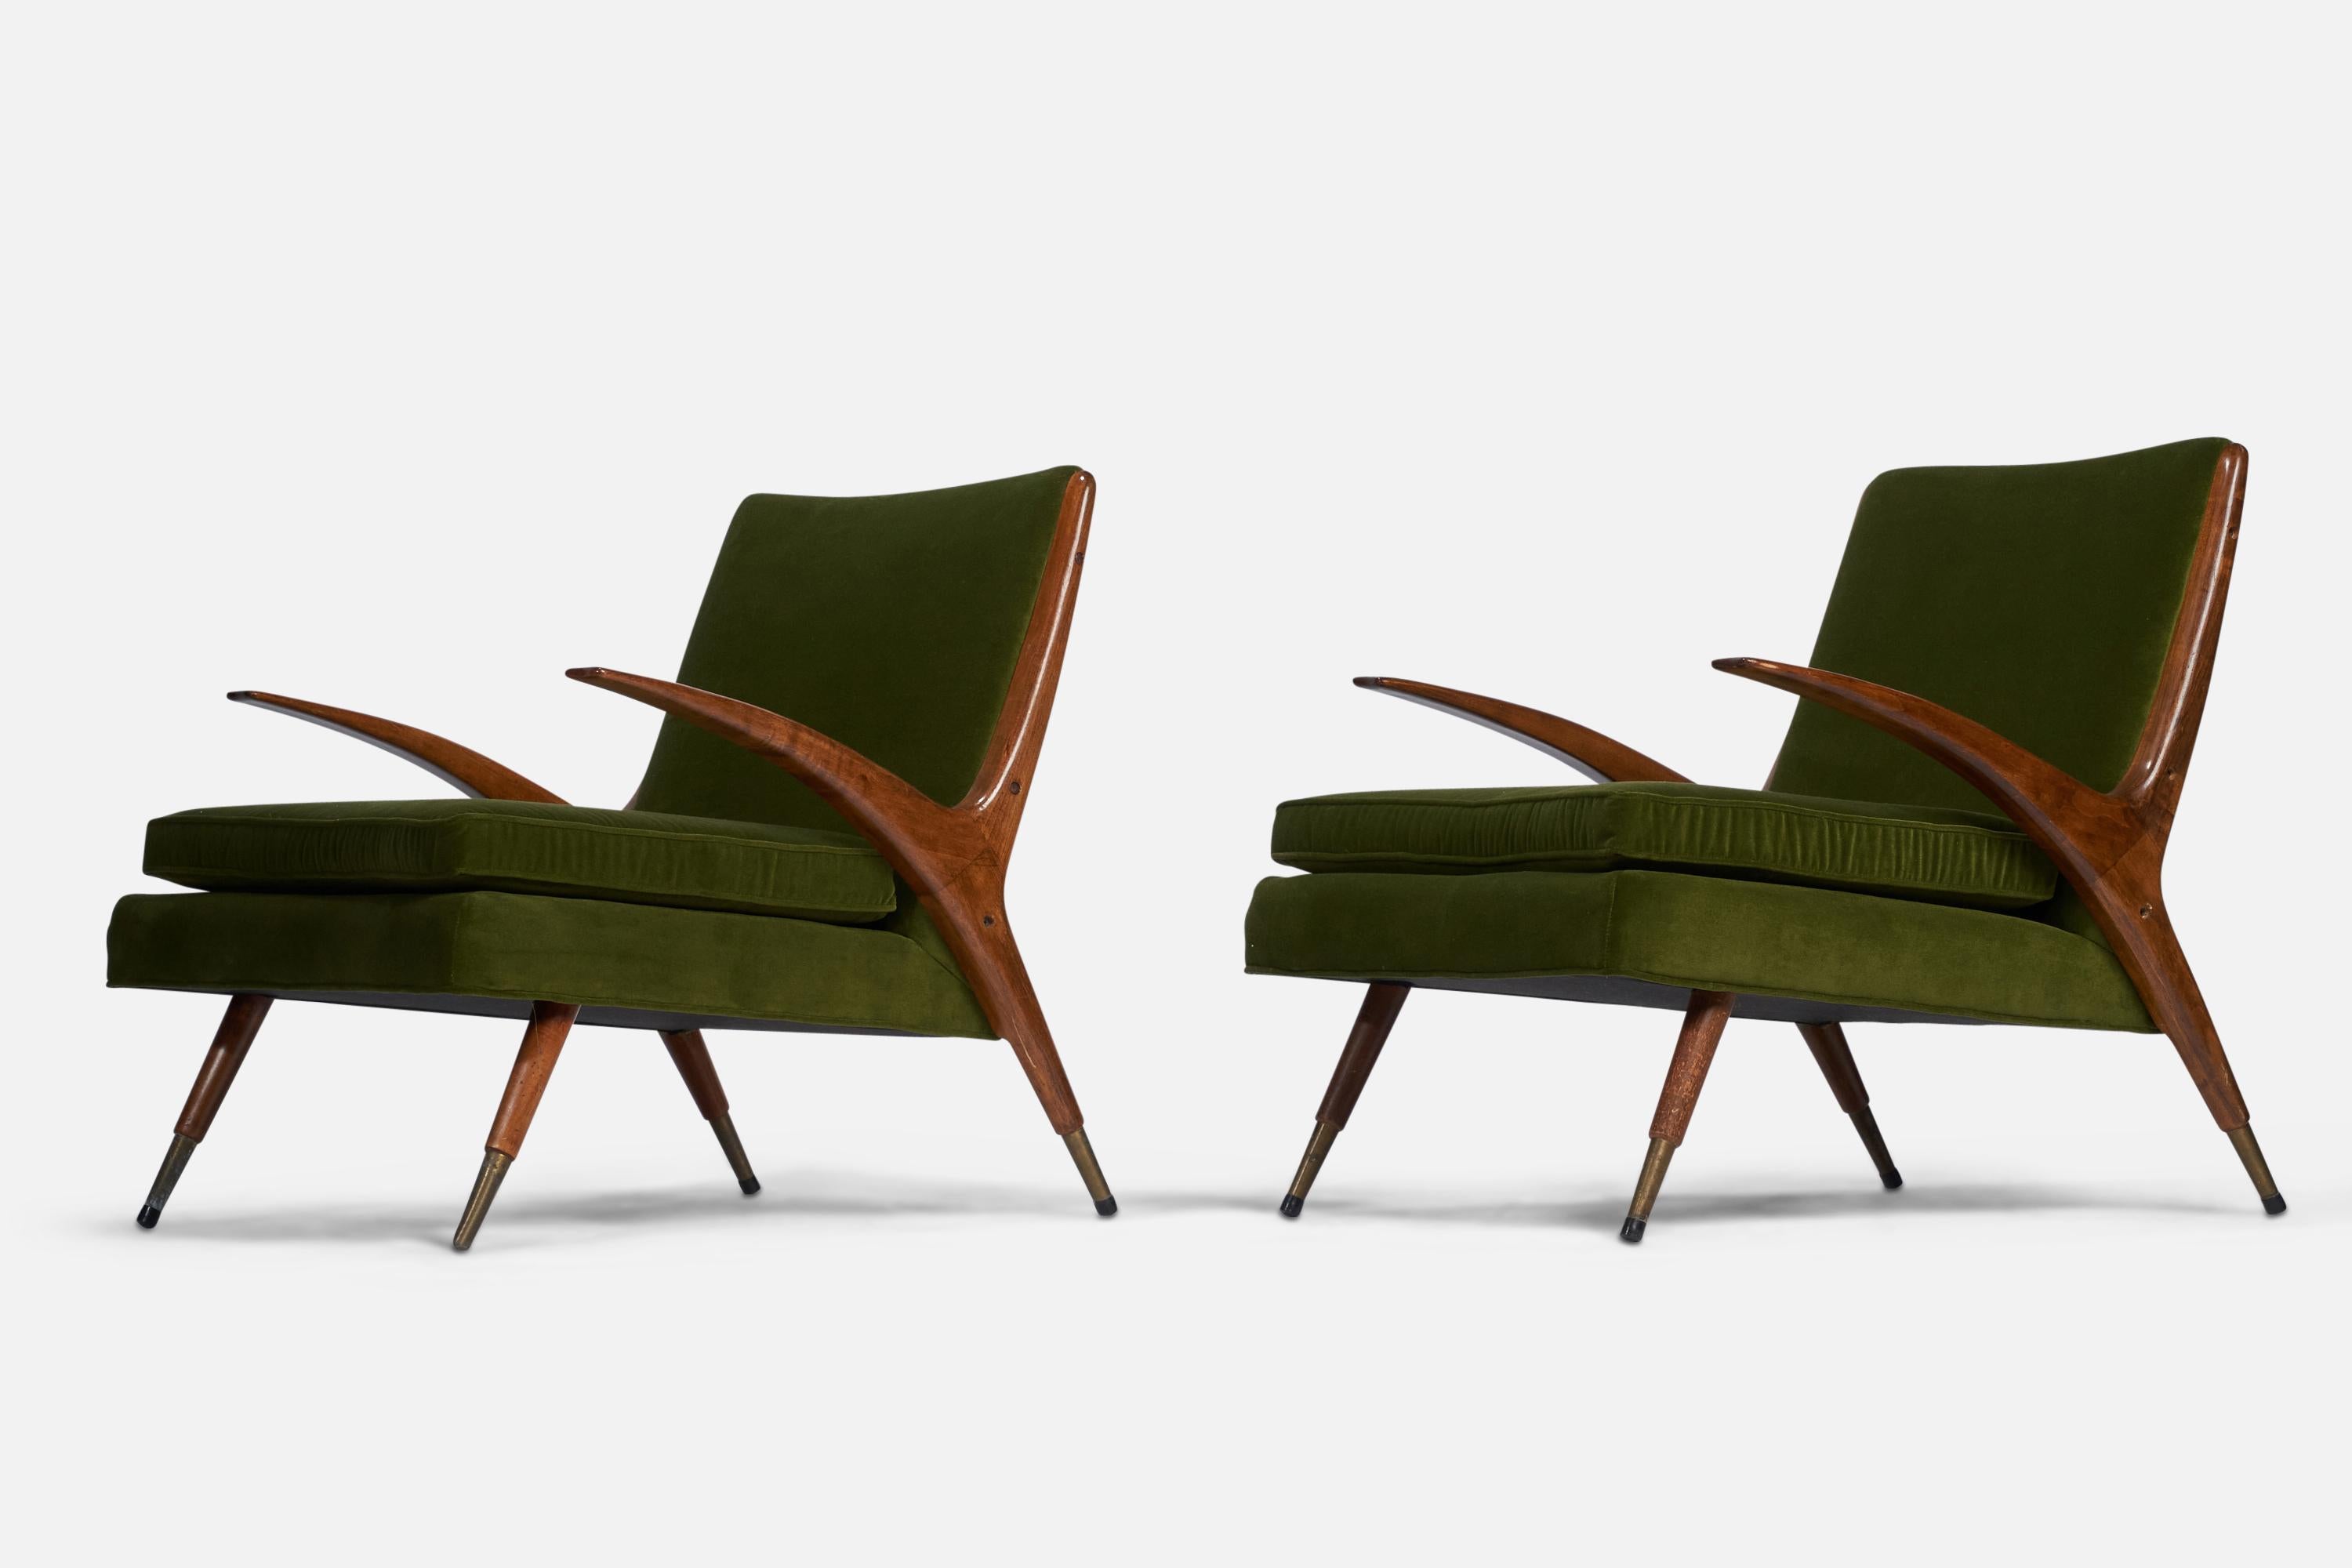 A pair of walnut, brass and green velvet lounge chairs designed and produced by Karpen of California, USA, 1950s.
Seat height: 16.5